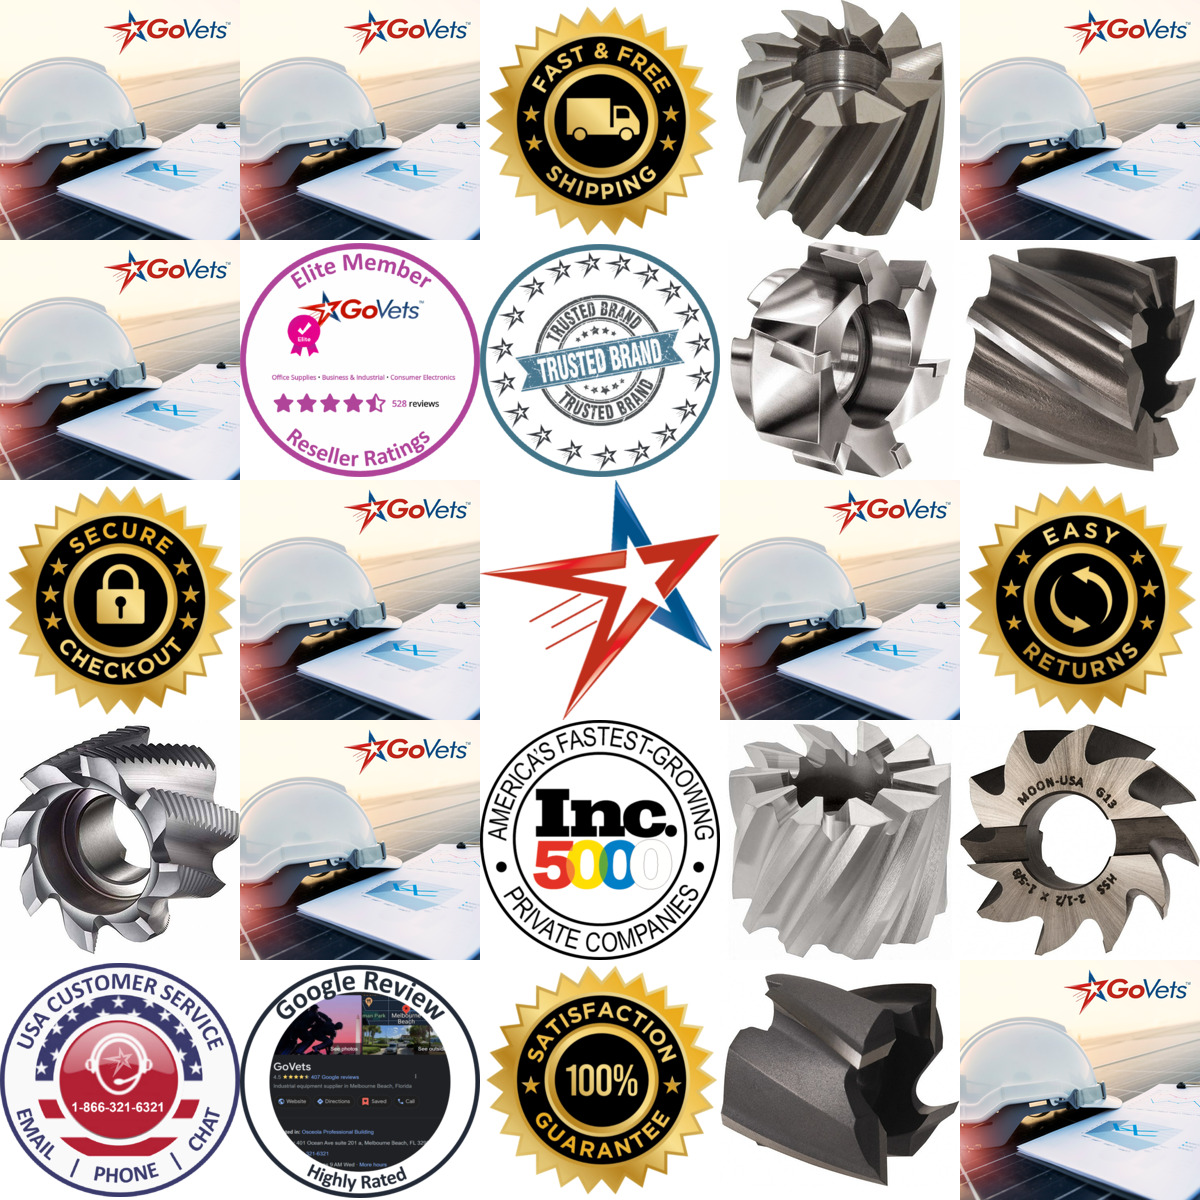 A selection of Shell End Mills products on GoVets